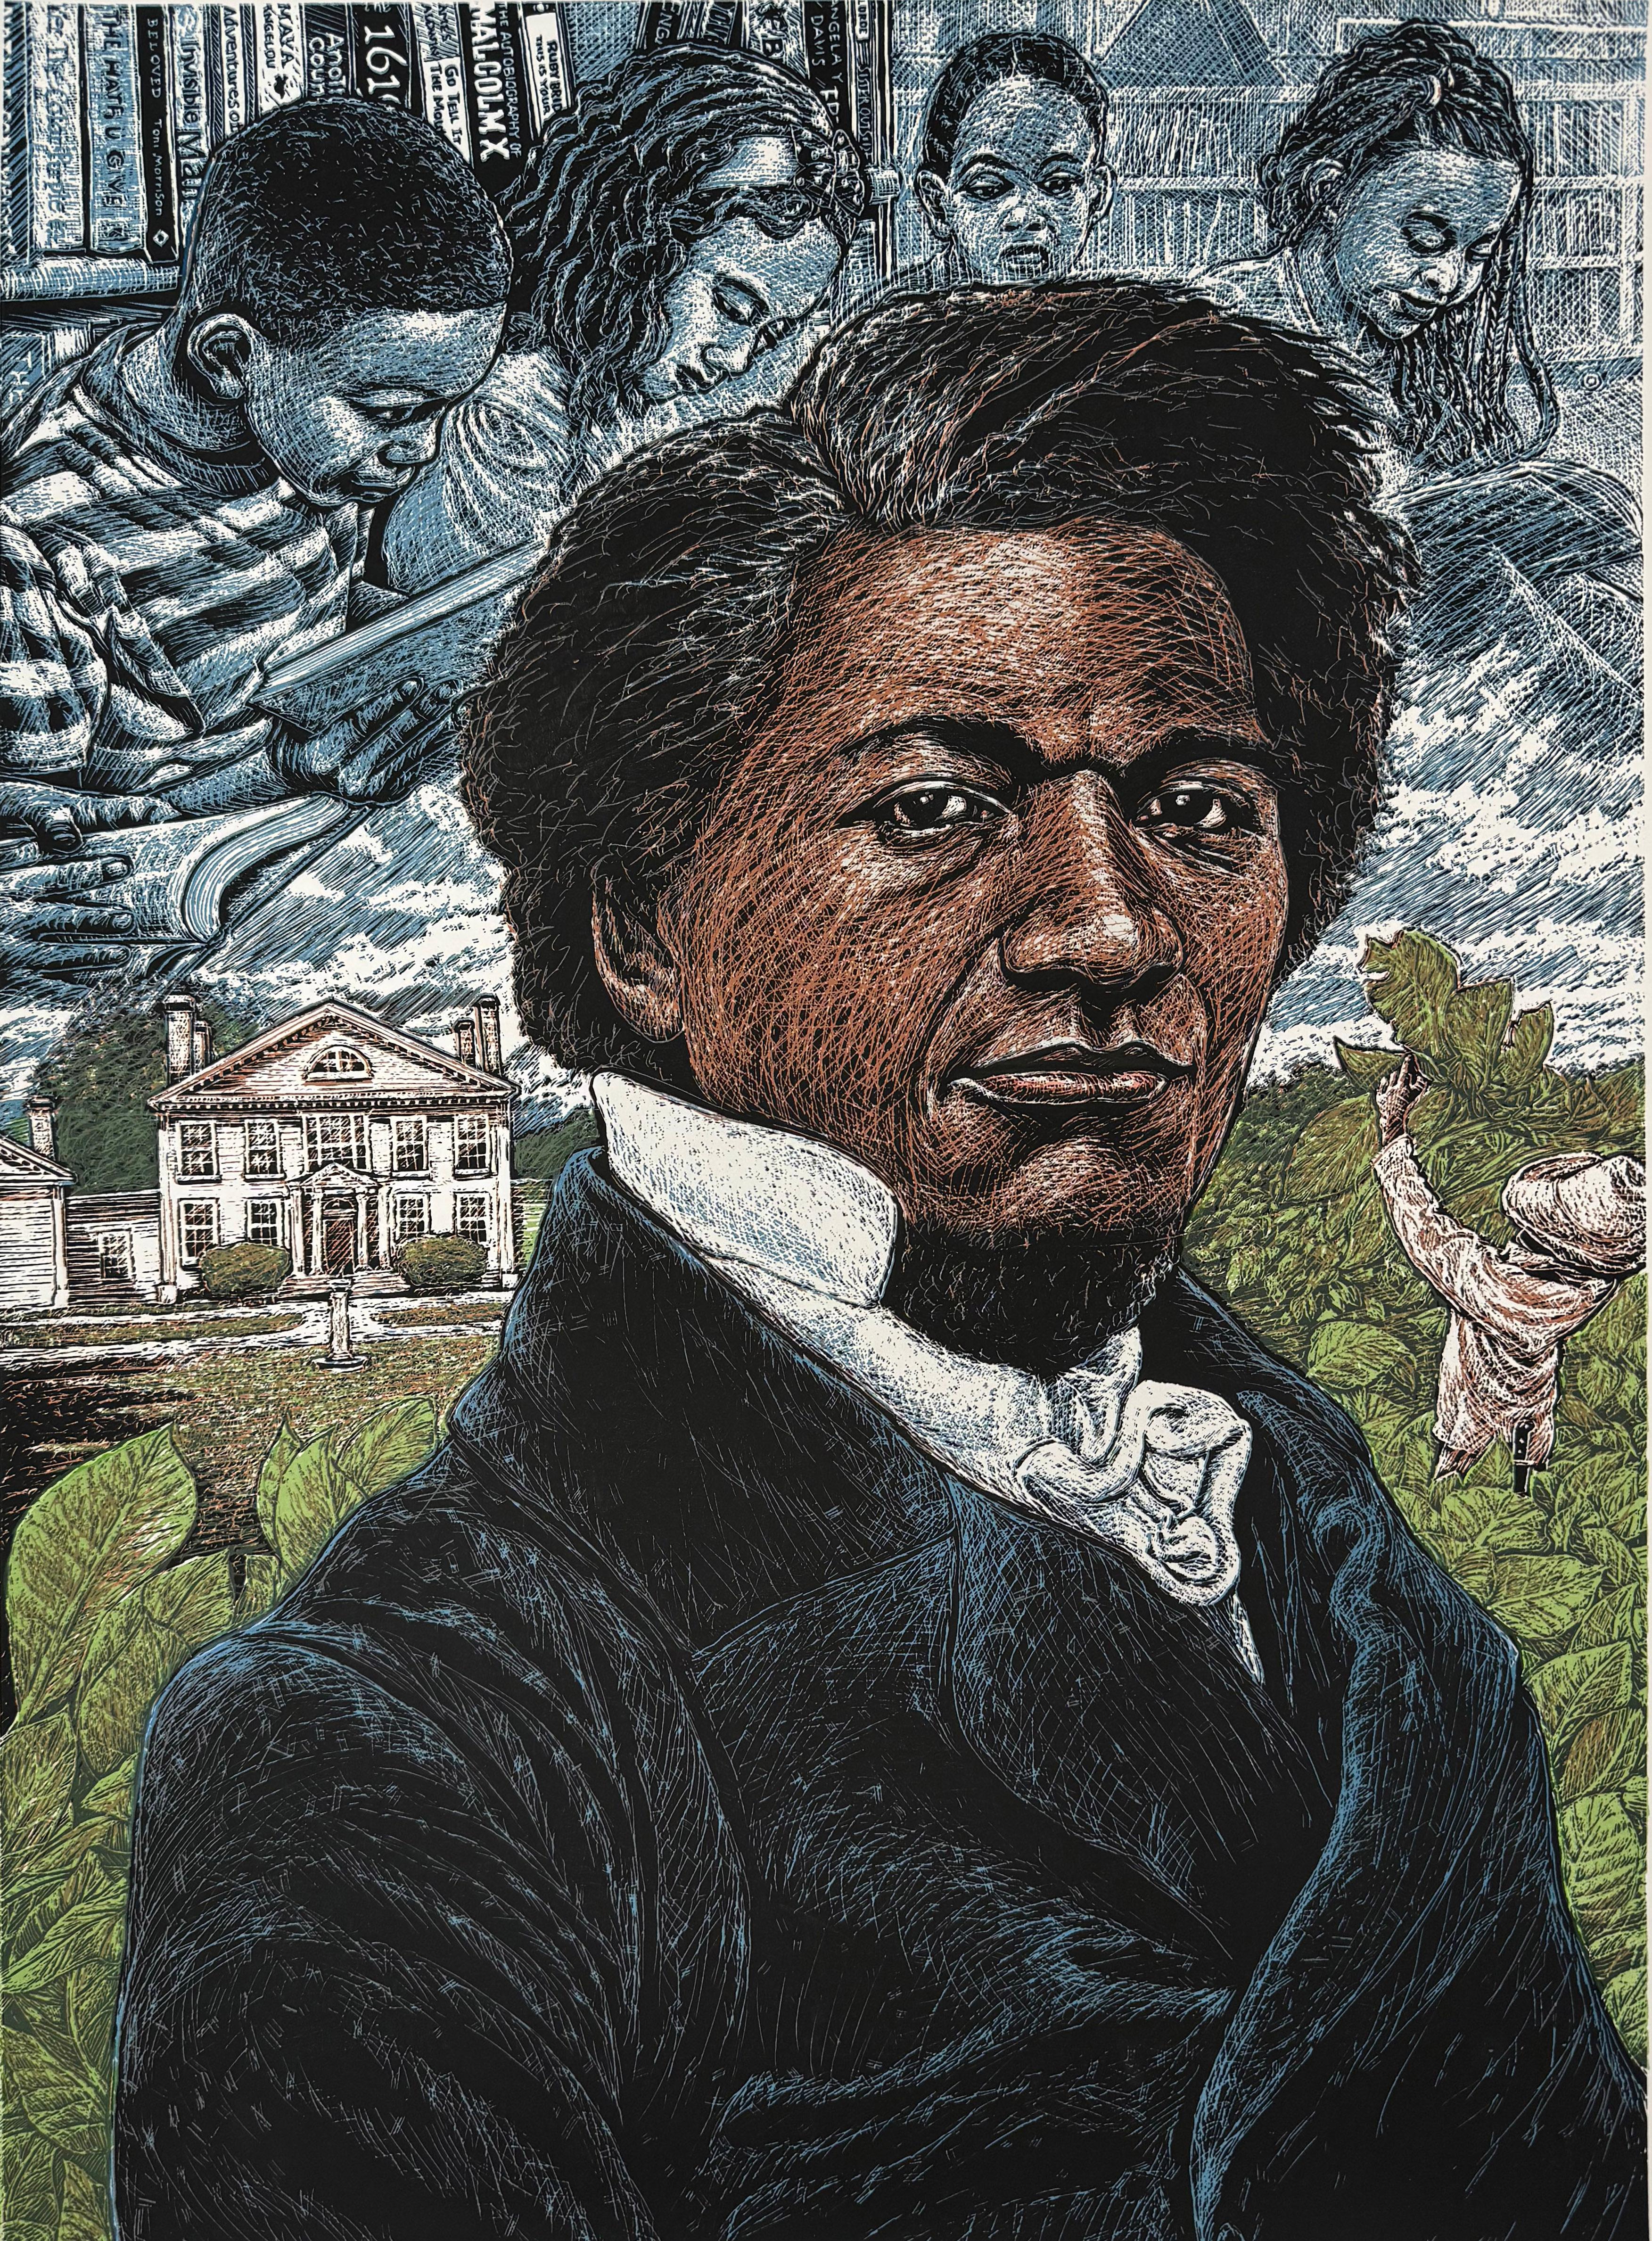 Portrait of Frederick Douglas. A former slave, he became one of the most famous abolitionist and an leader in the movement for African-American civil rights in the 19th century. 

Medium: Screenprint
Year: 2023
Image Size: 20 x 15 inches
Paper Size: